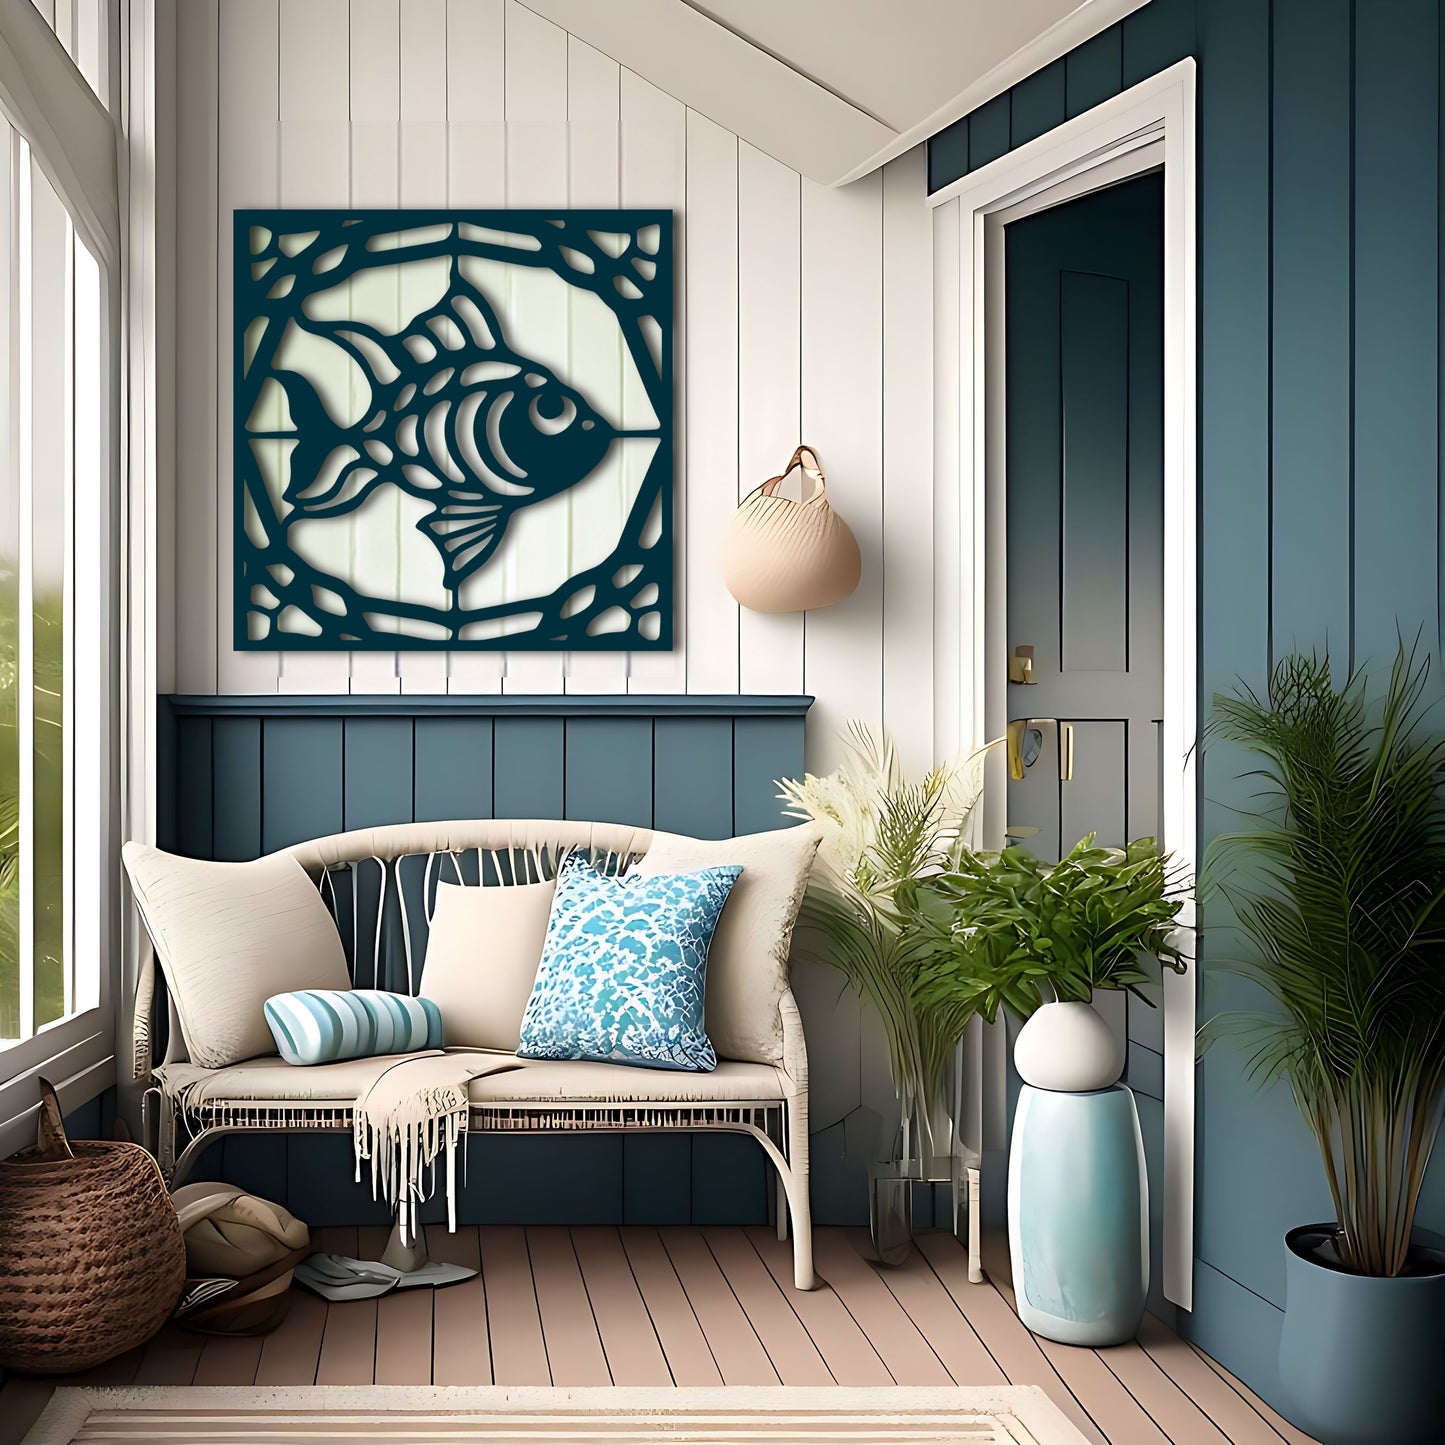 Fish Art Deco in Square Border - Perfect Gift for Fishing Enthusiasts